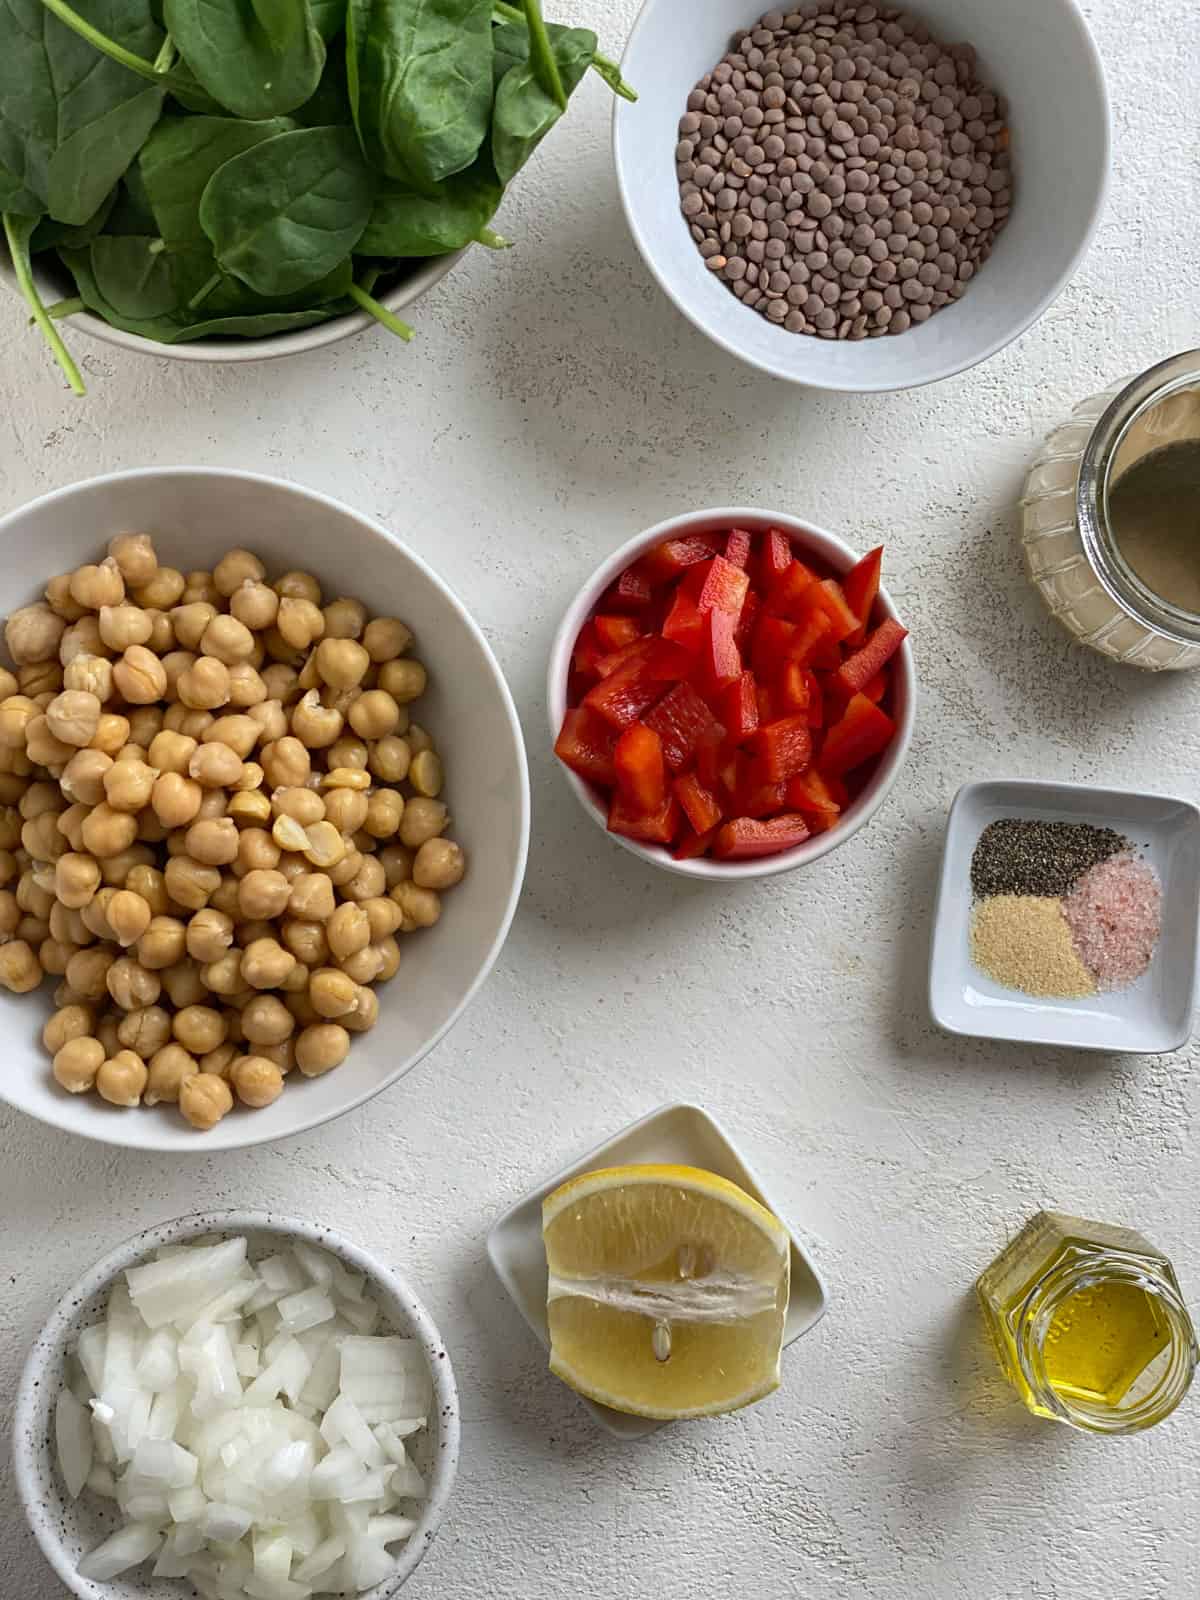 ingredients for Vegan Lentil Chickpea Salad measured out against a white surface